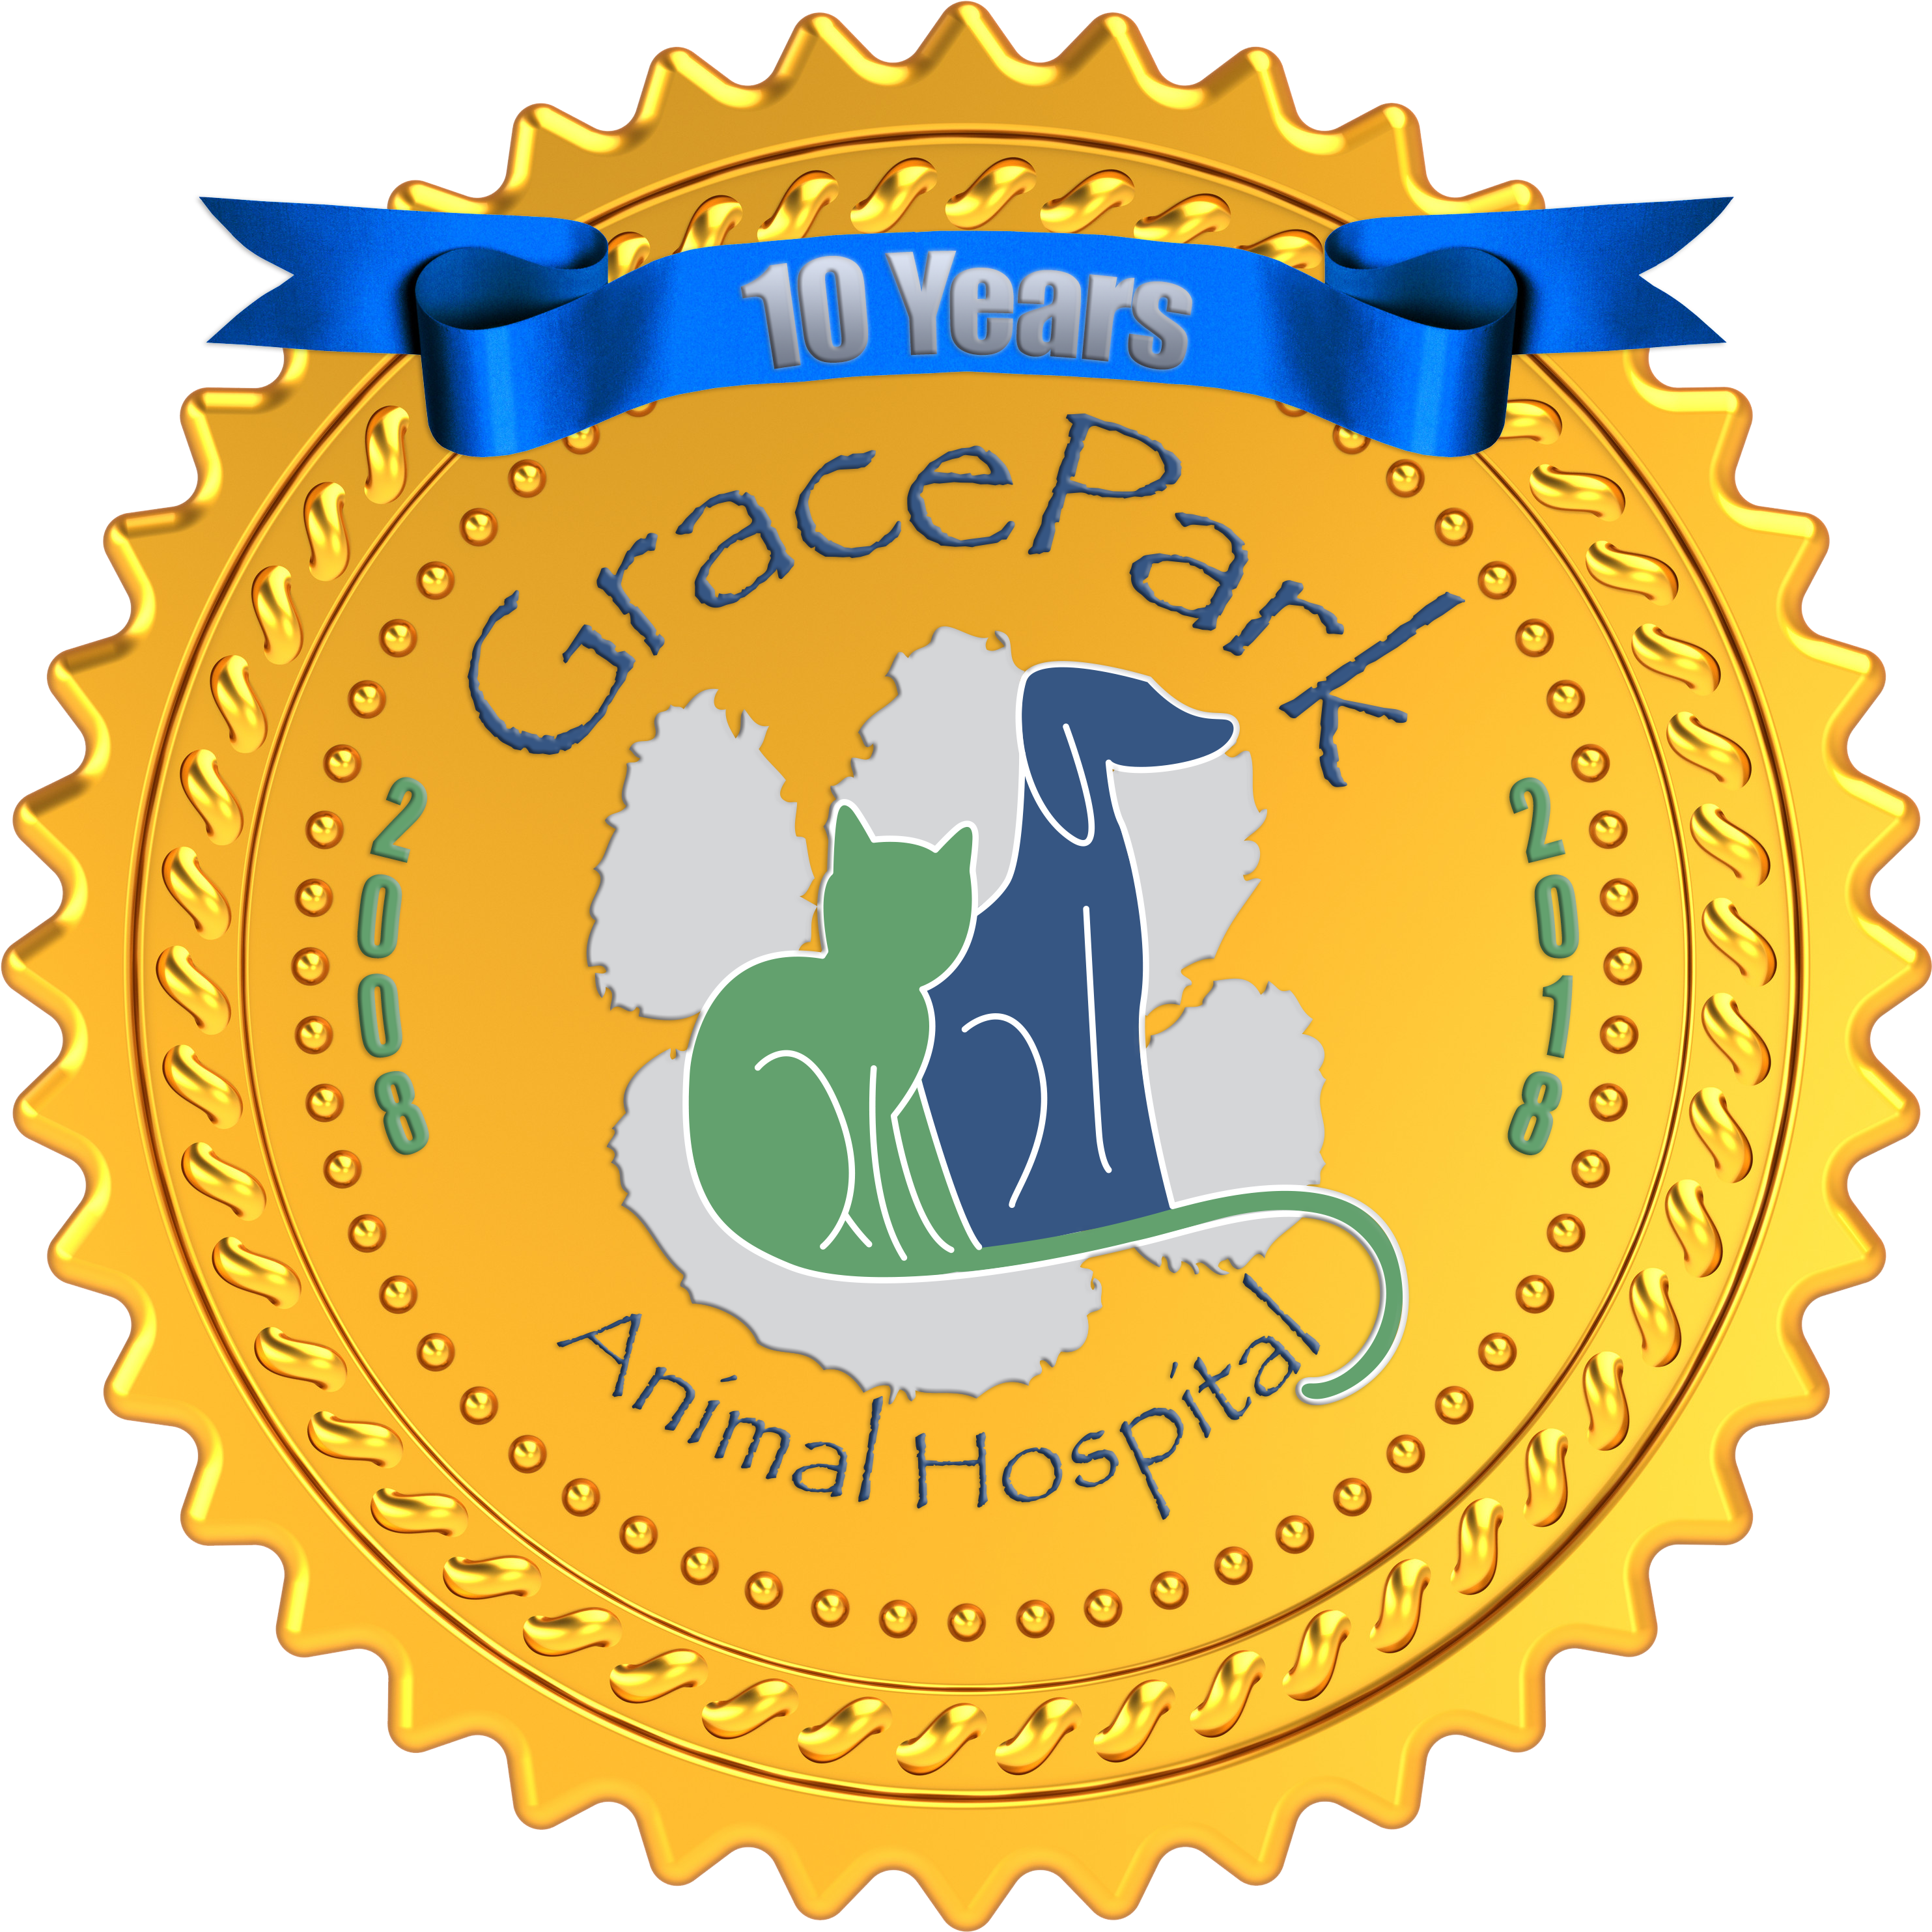 This Month Is Grace Park Animal Hospital's 10 Year - Seal Of Approval Psd (3000x3000)